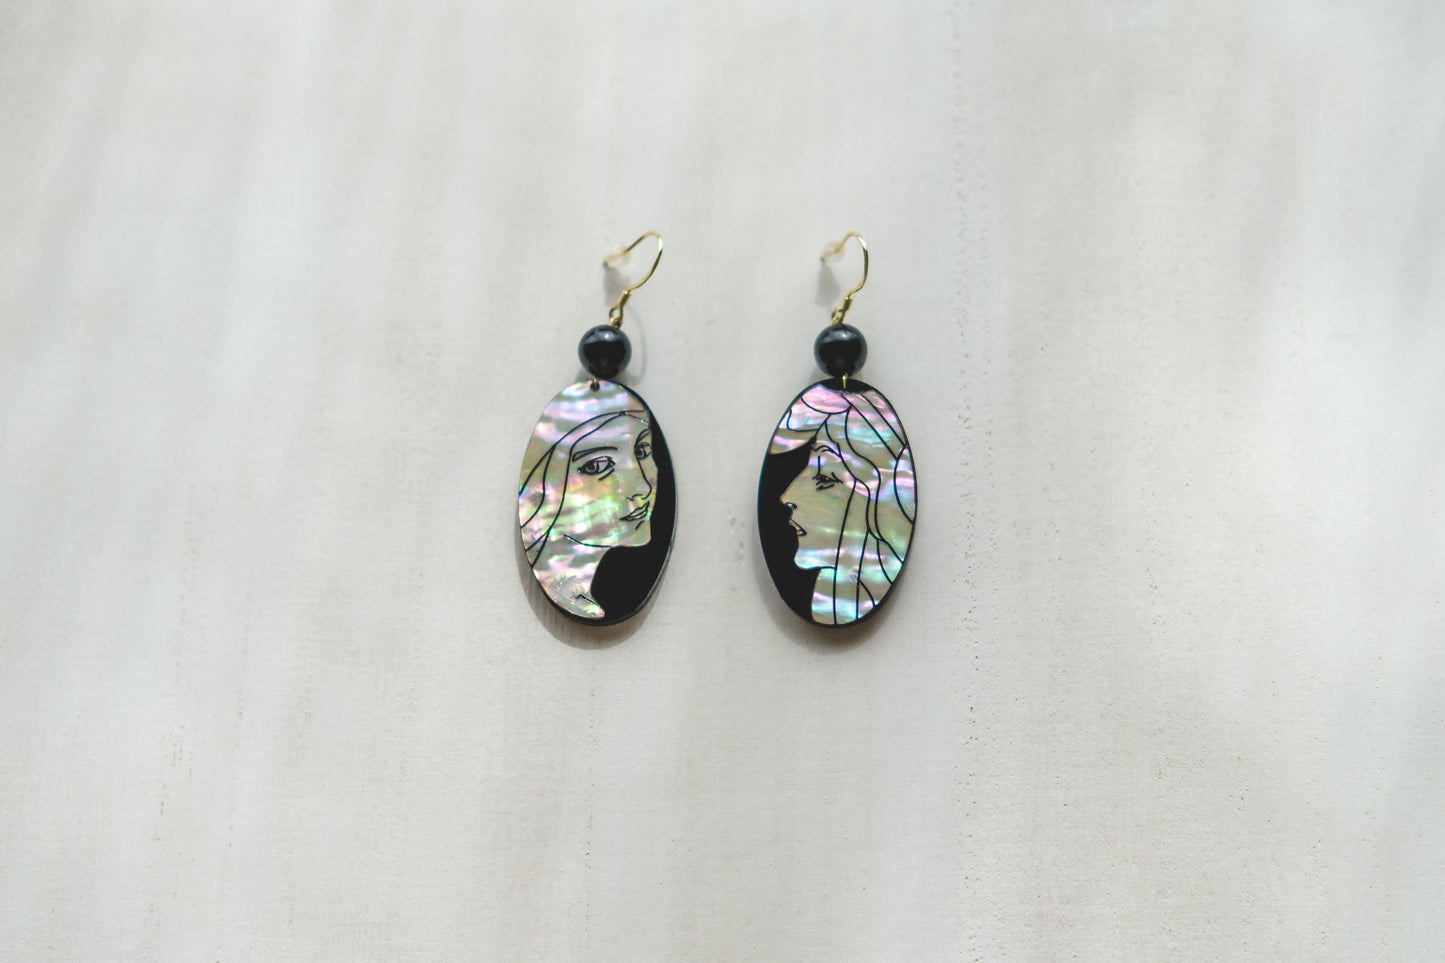 Mother of pearl earrings with engraved portrait of women in art nouveau style..